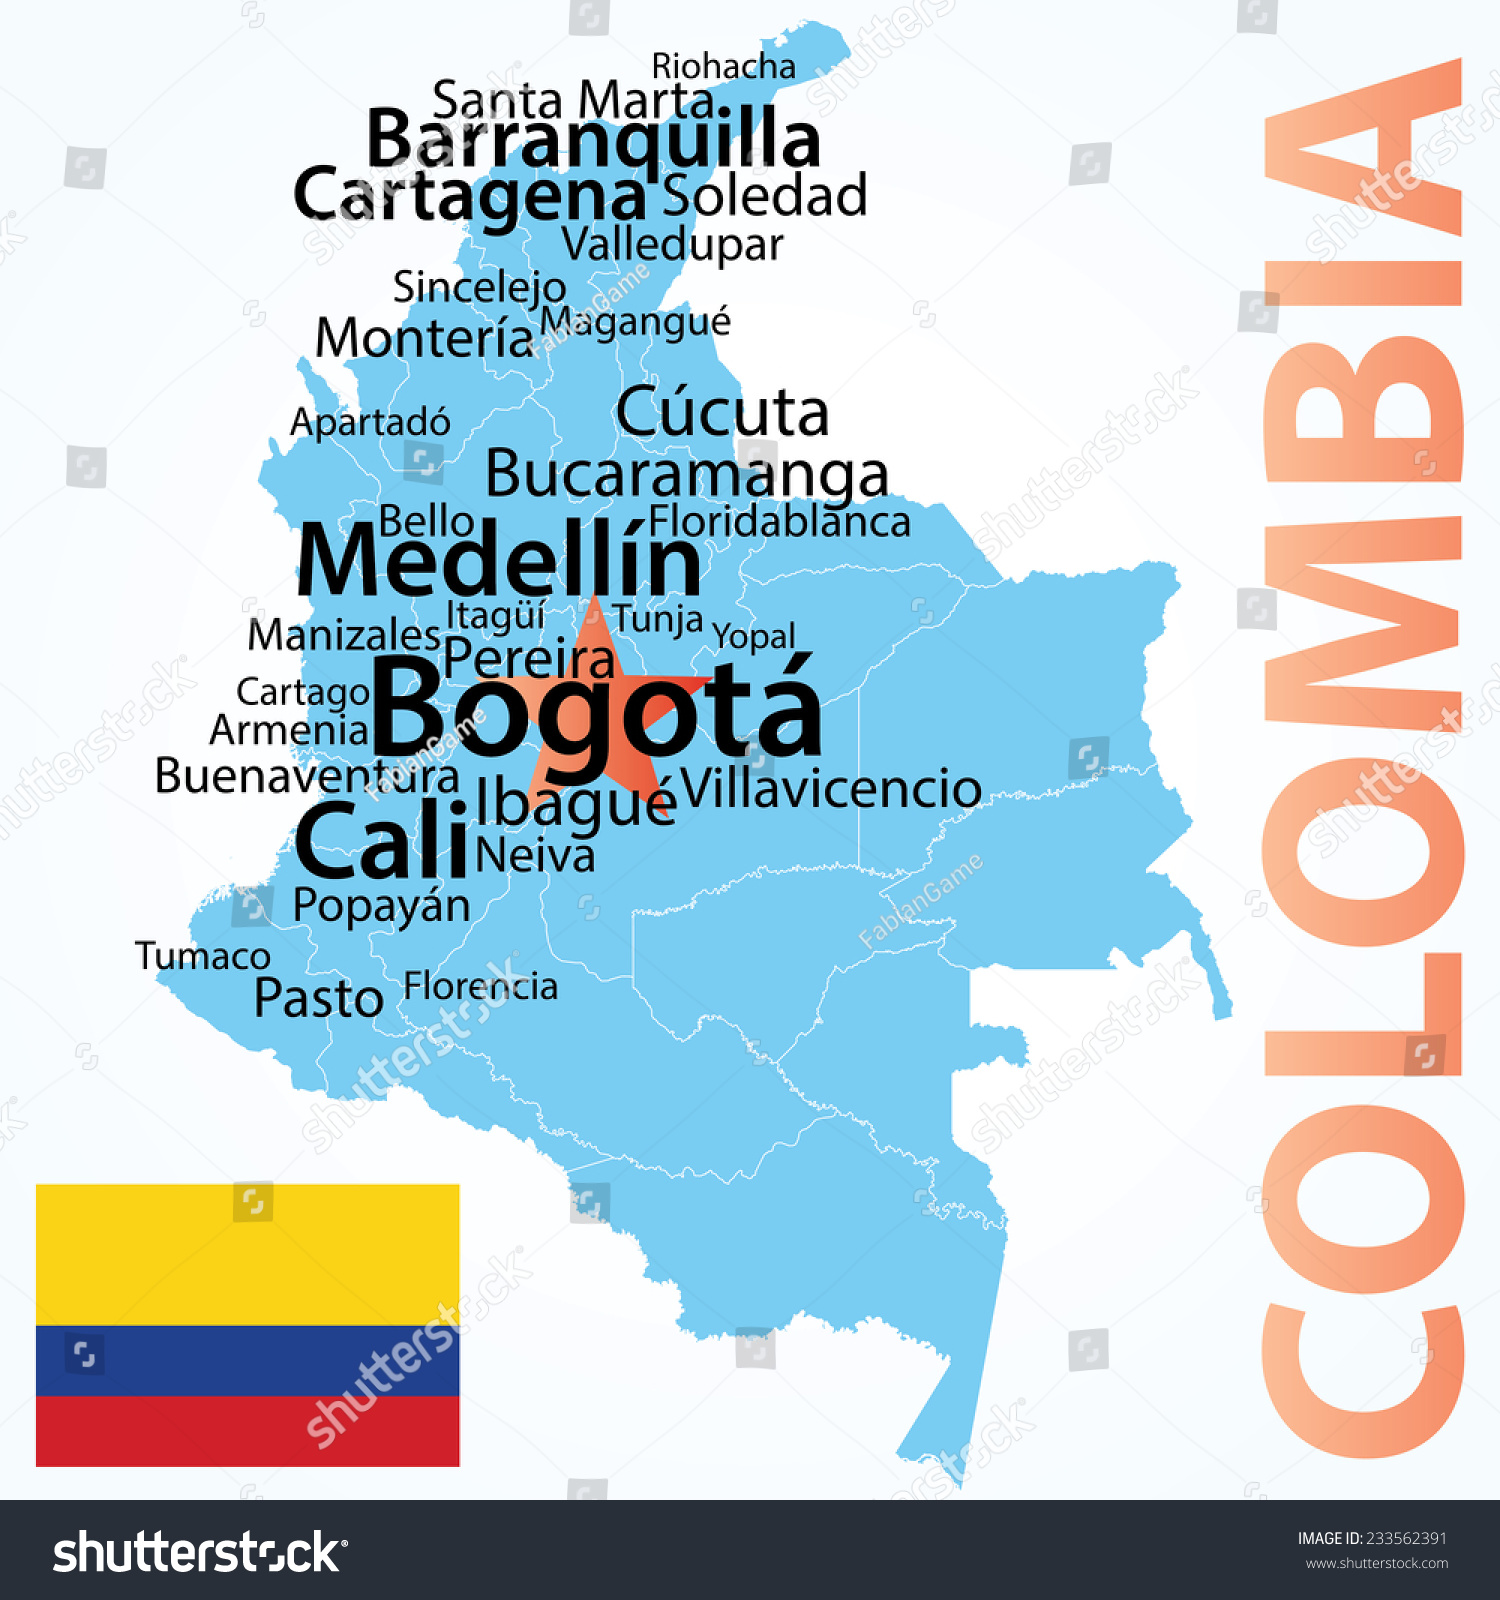 Top 102+ Images what is the largest city in colombia Latest